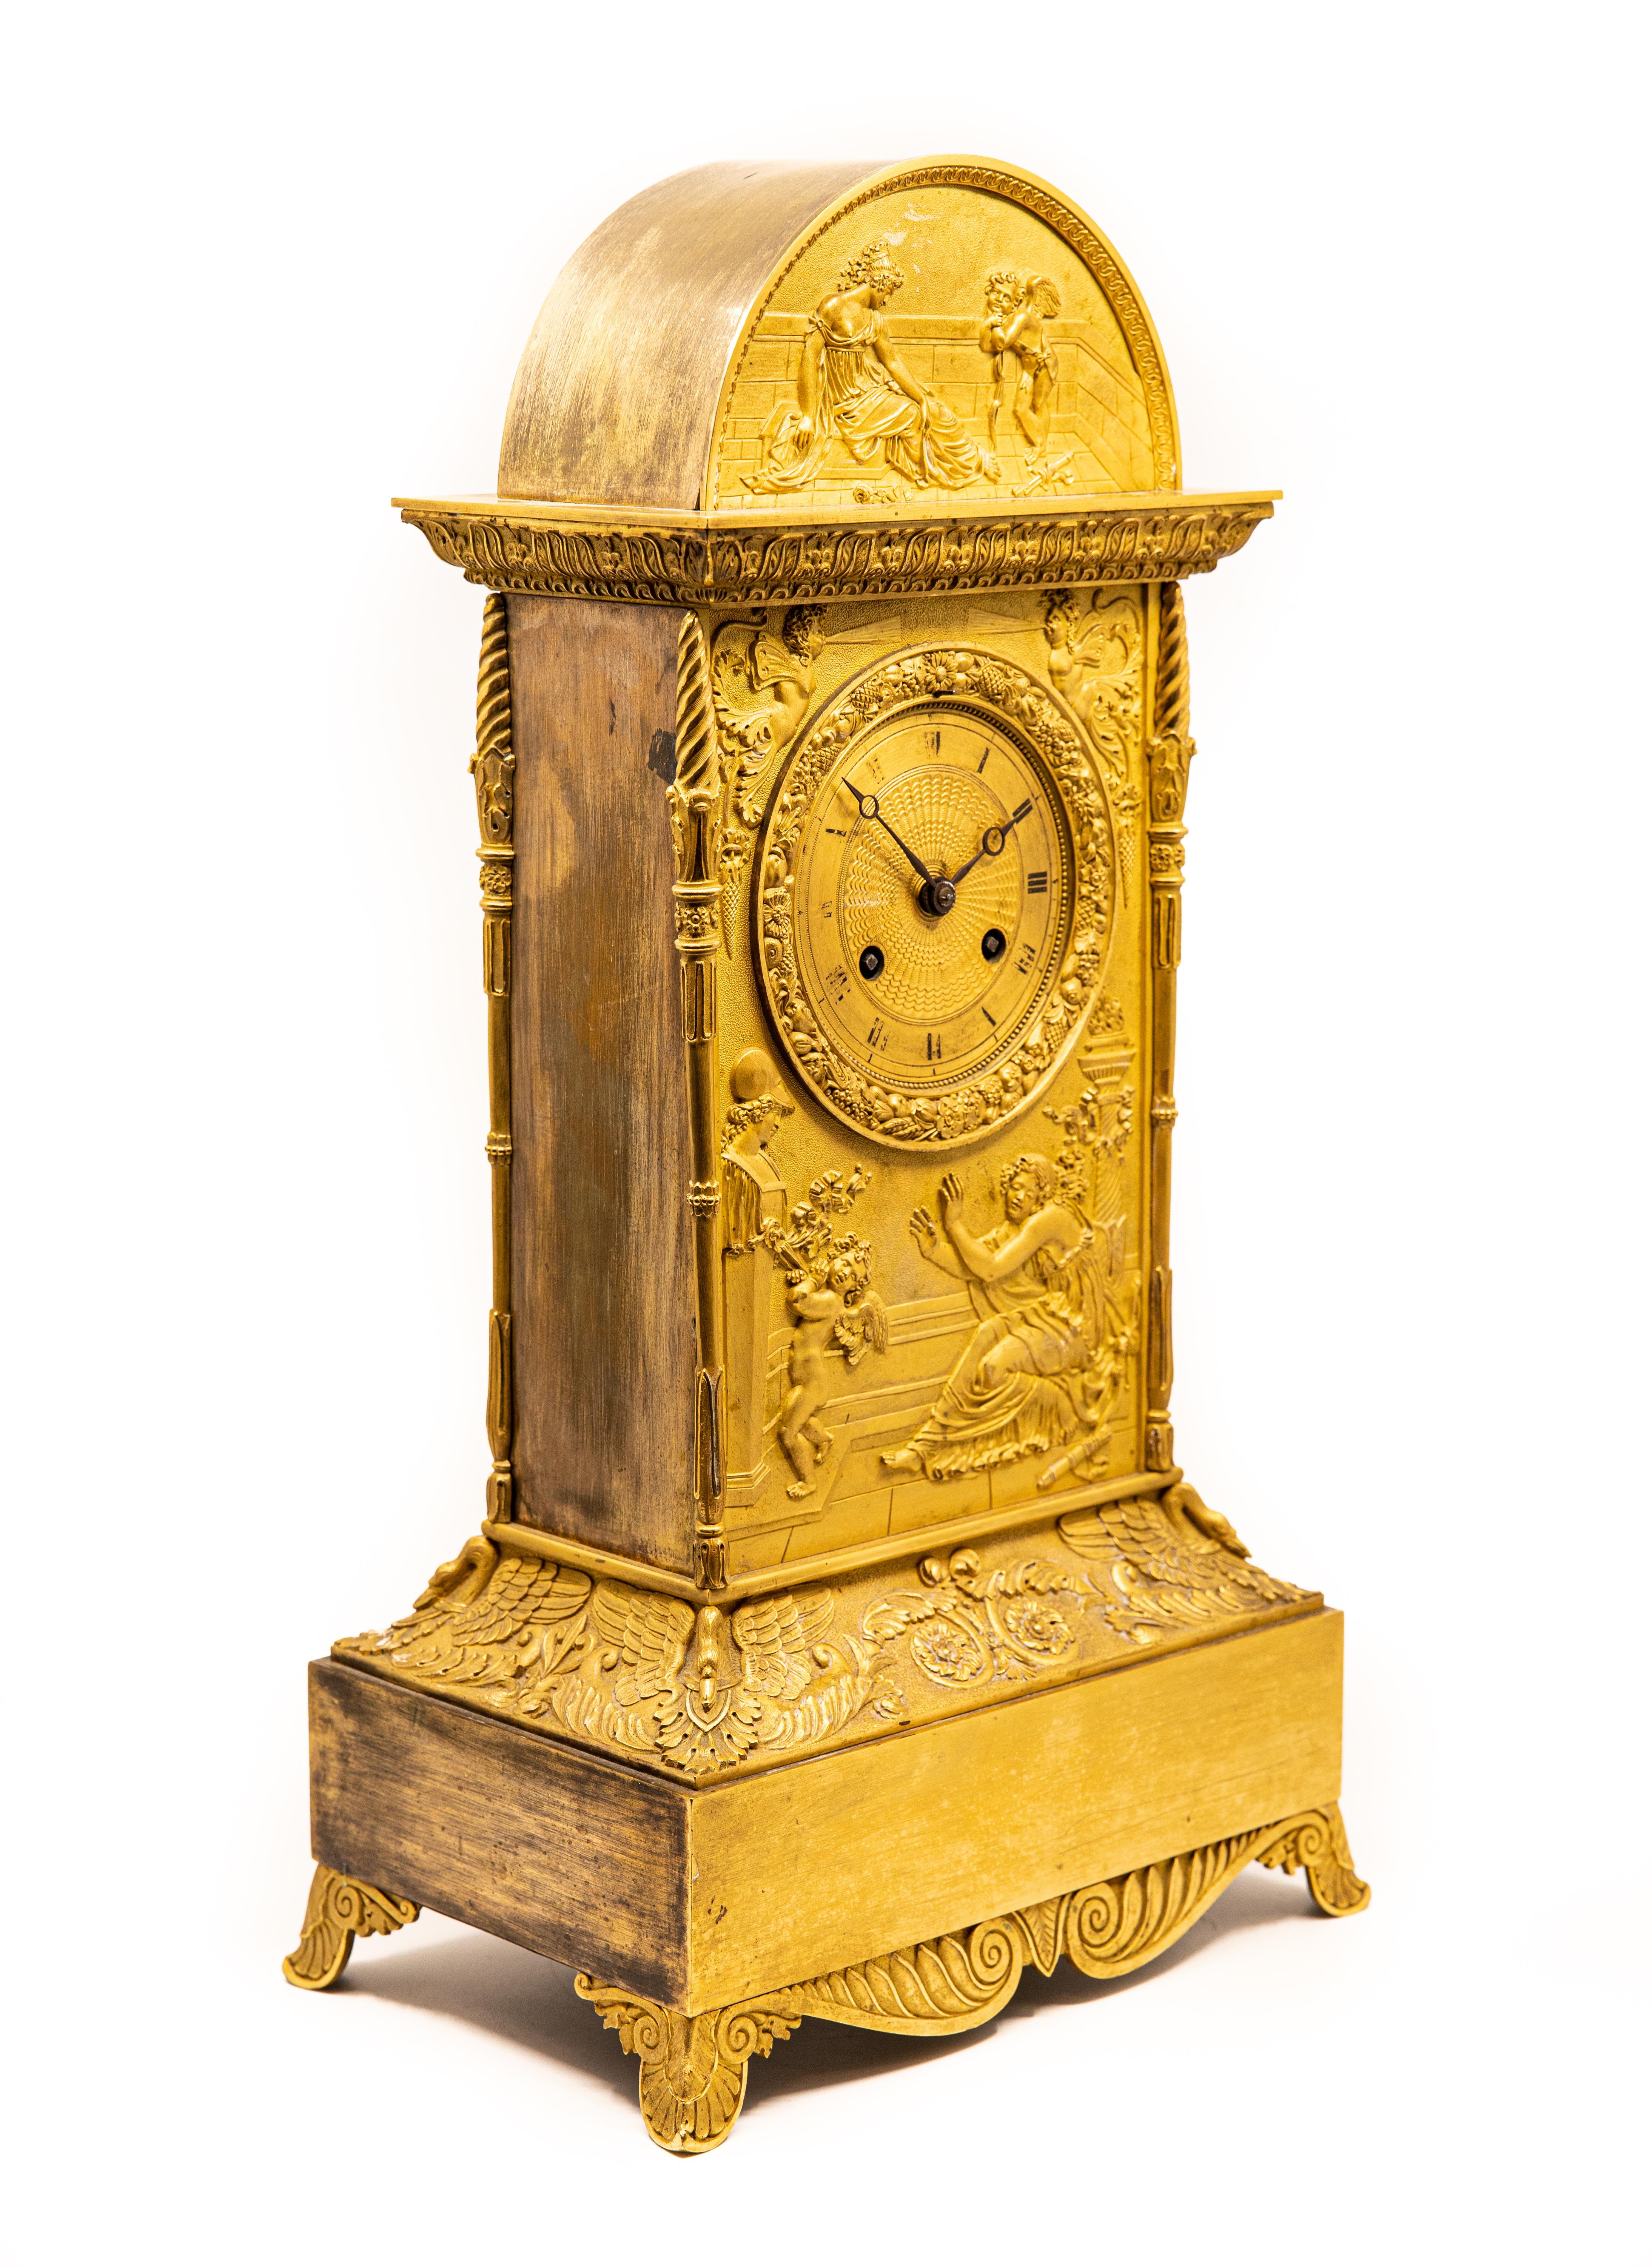 Neoclassical gilt bronze with bas-relief allegorical scene with cupid bound to a statue and a maiden motif ormolu mantel clock, dial with painted Roman numerals, movement marked: 